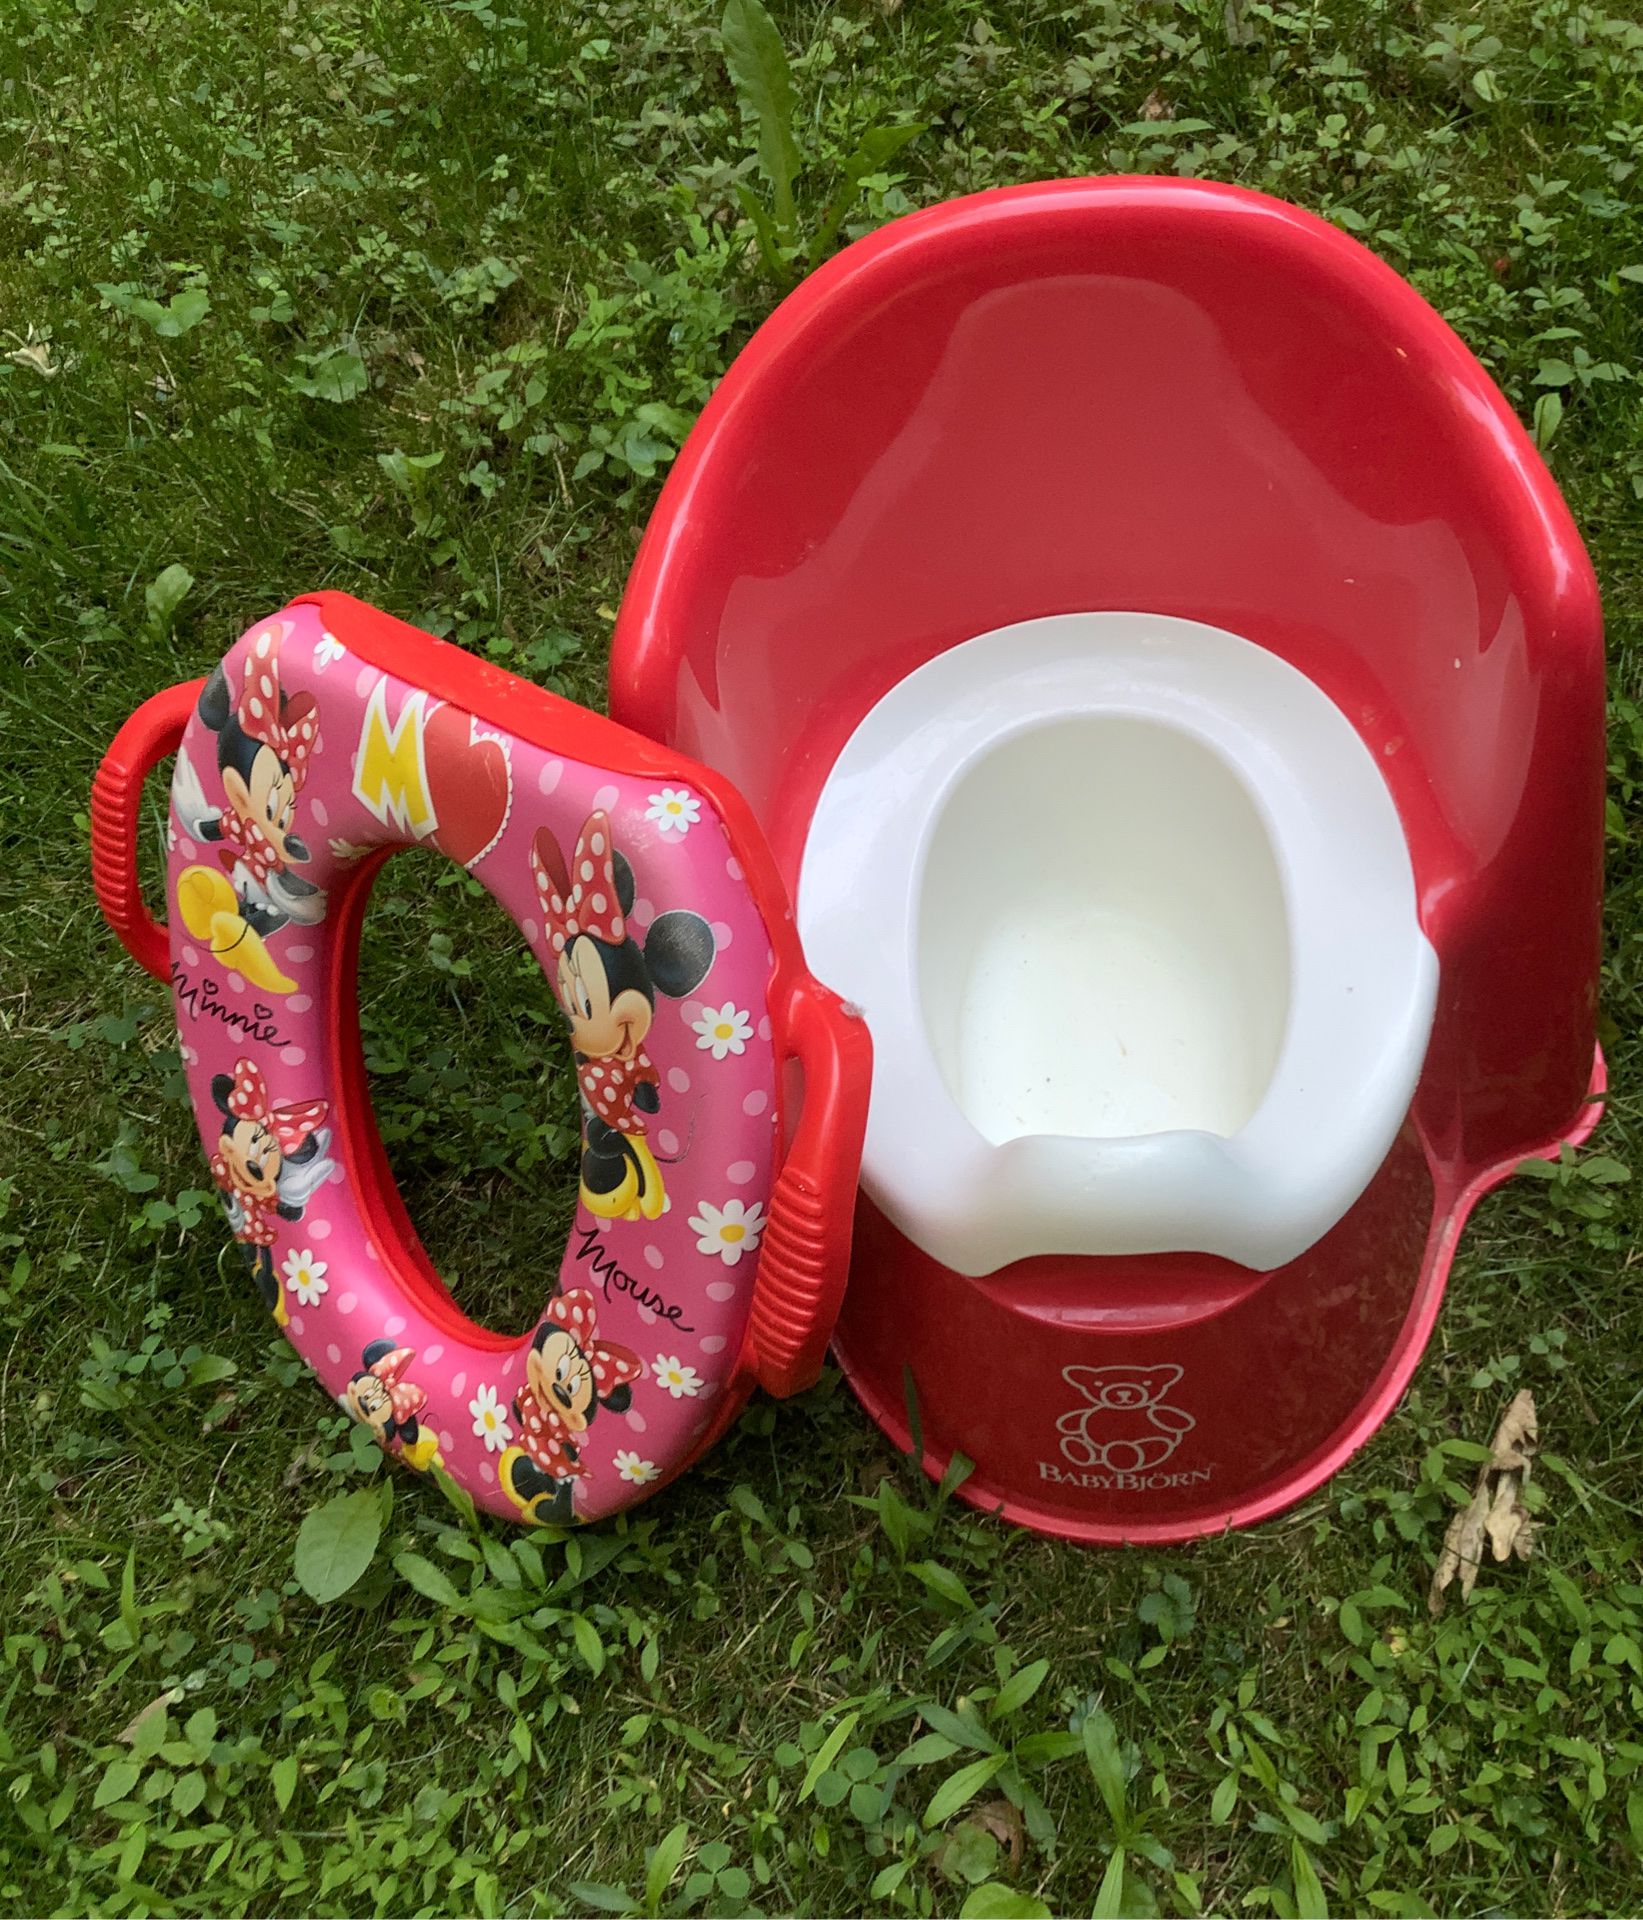 Fun toilet training and potty